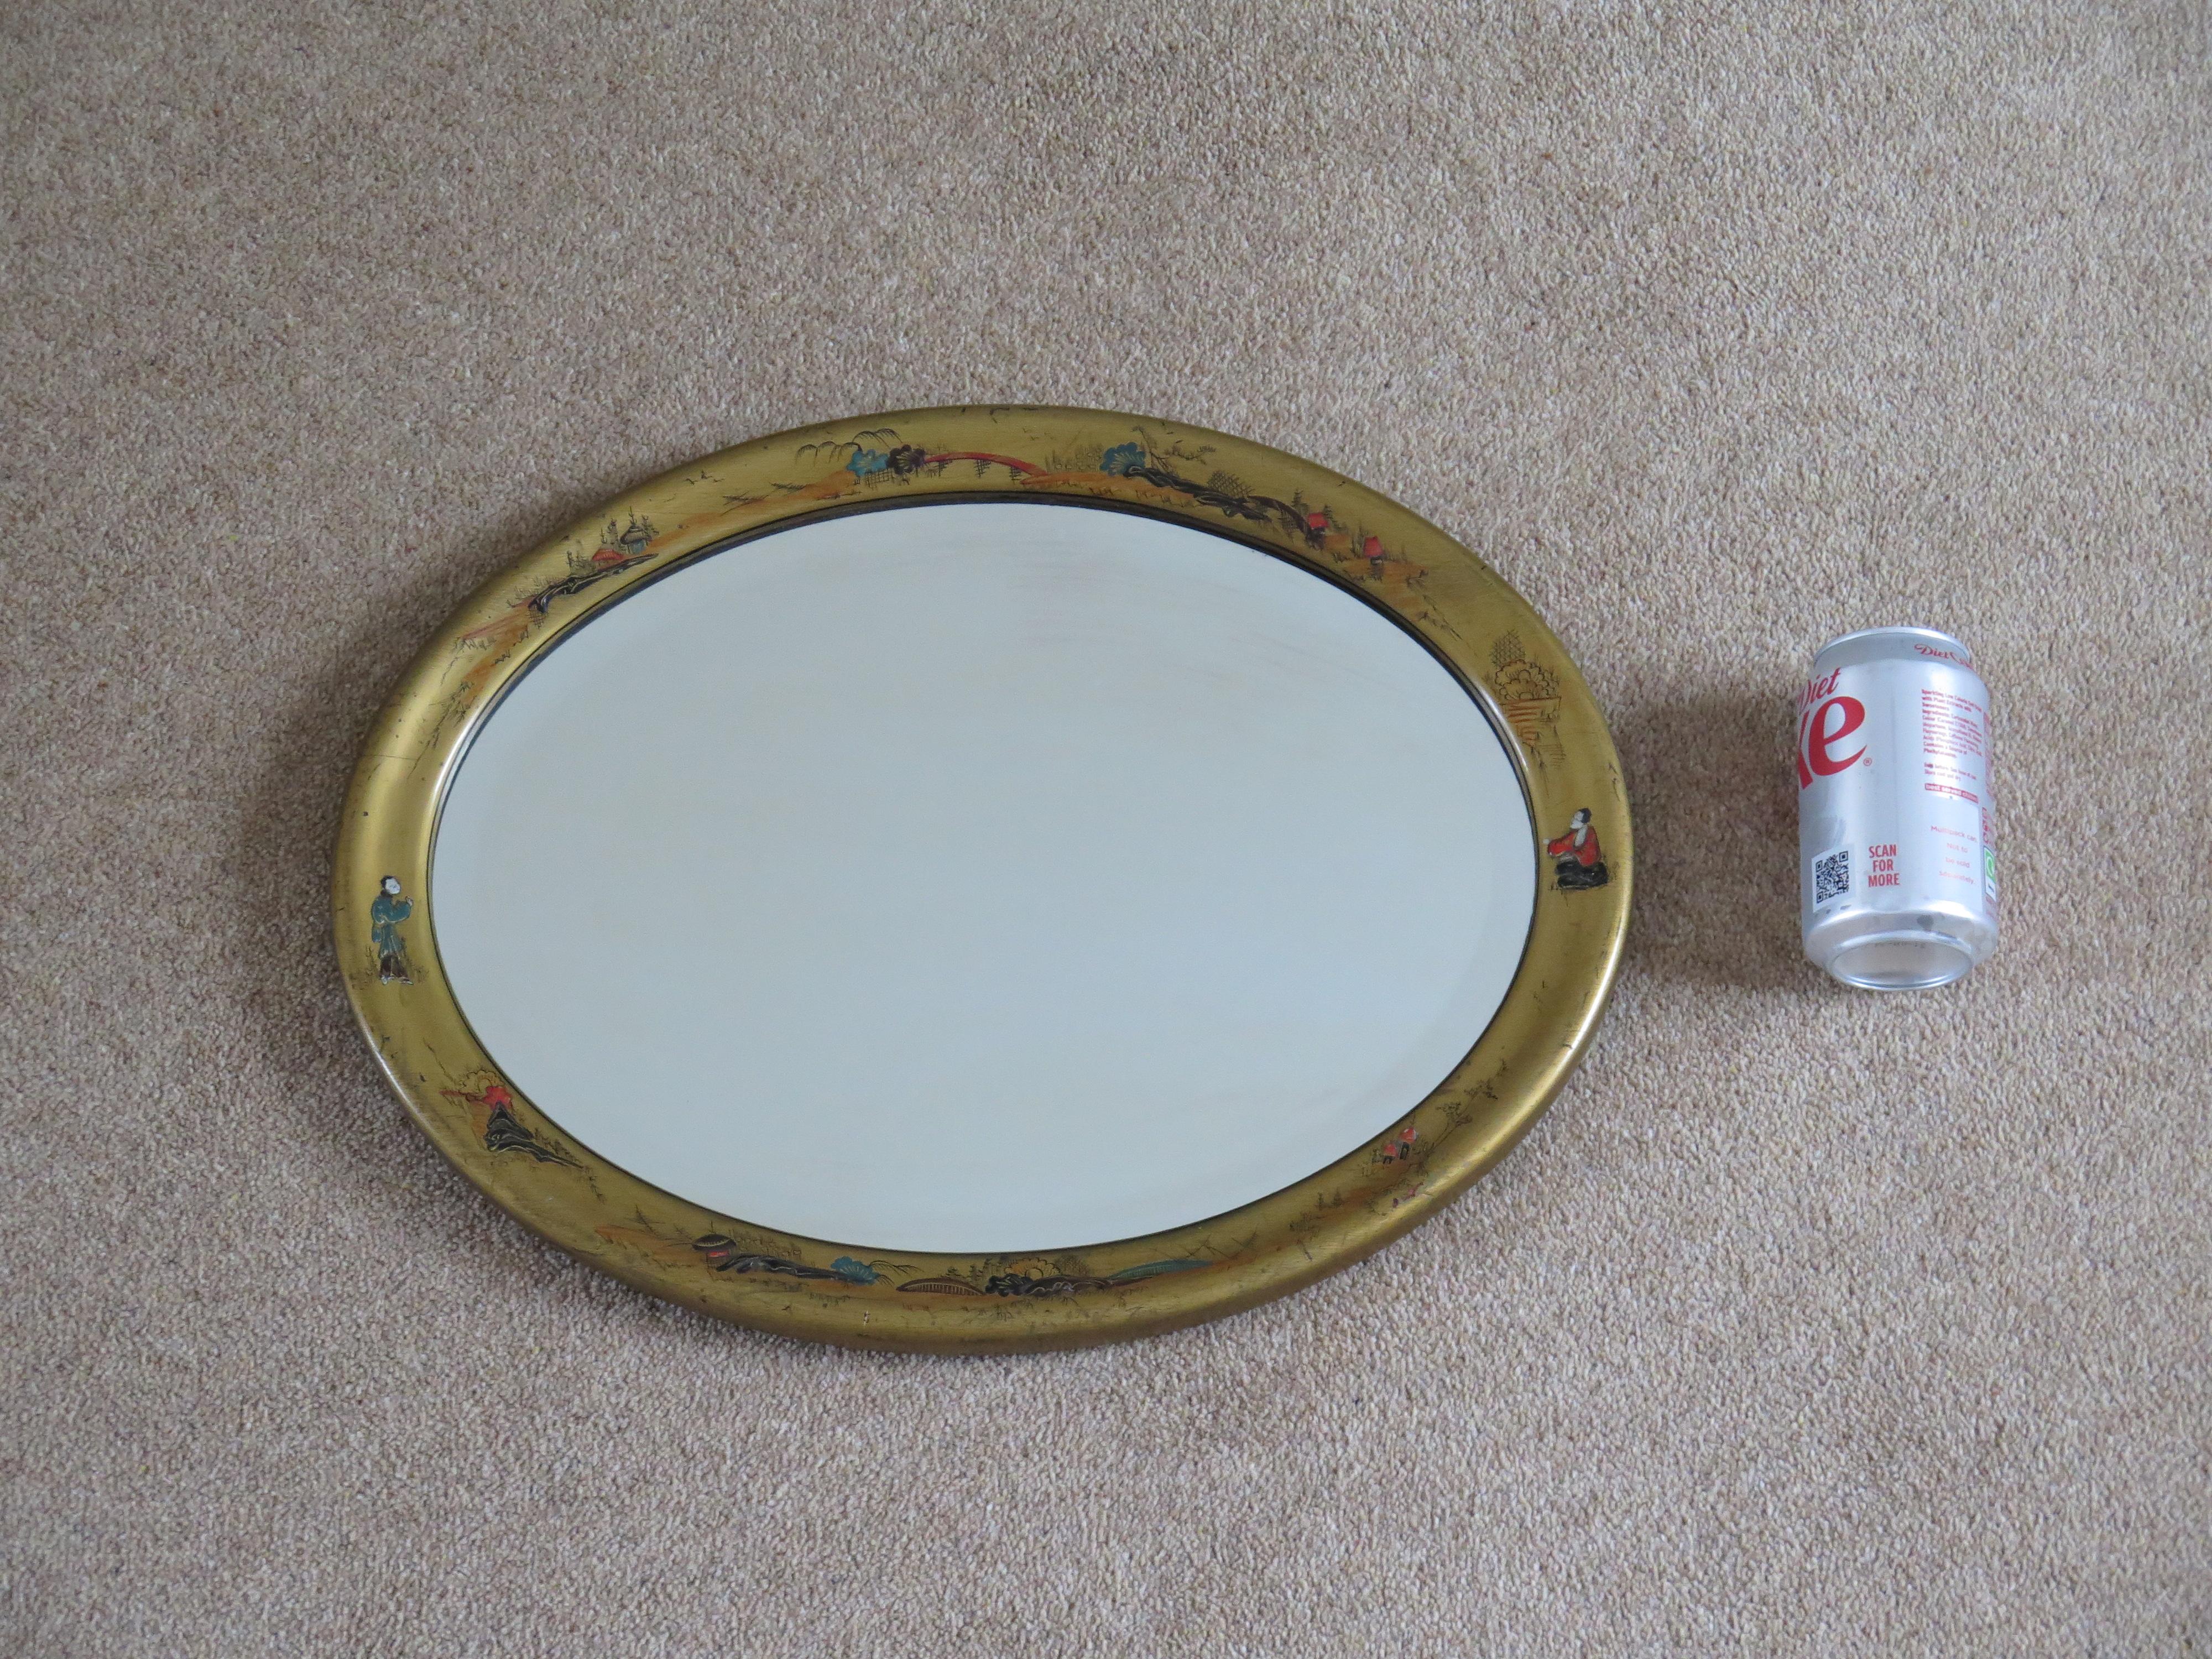 Oval Edwardian Gilt Chinoiserie Wall Mirror Bevelled Glass, English circa 1900 For Sale 13